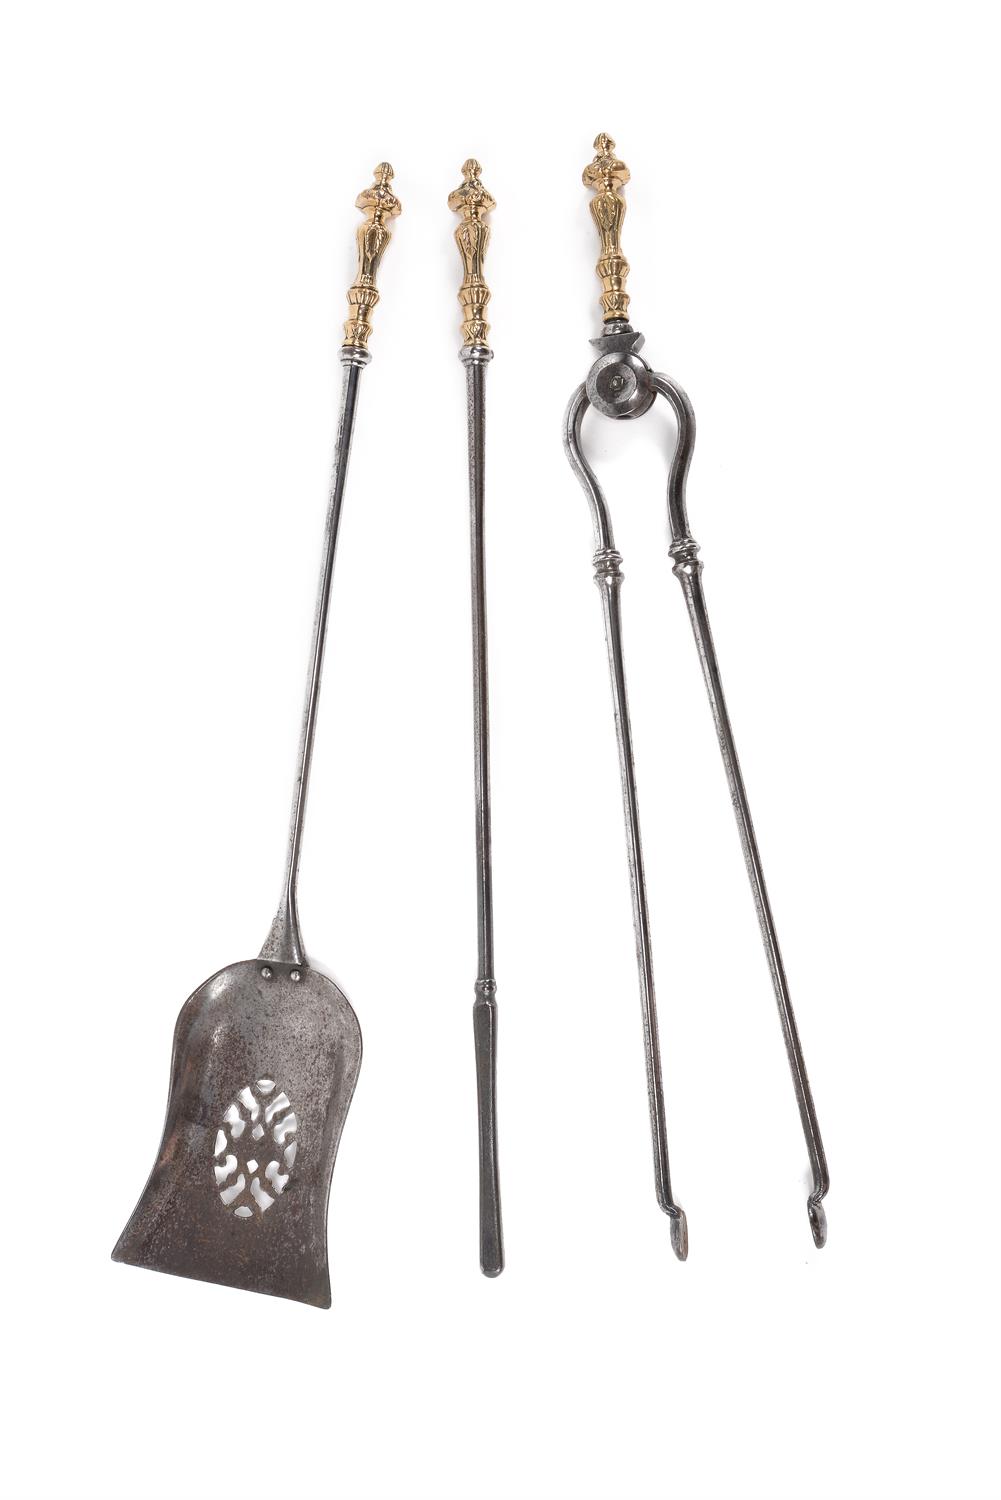 A set of William IV or early Victorian steel and brass mounted fire tools